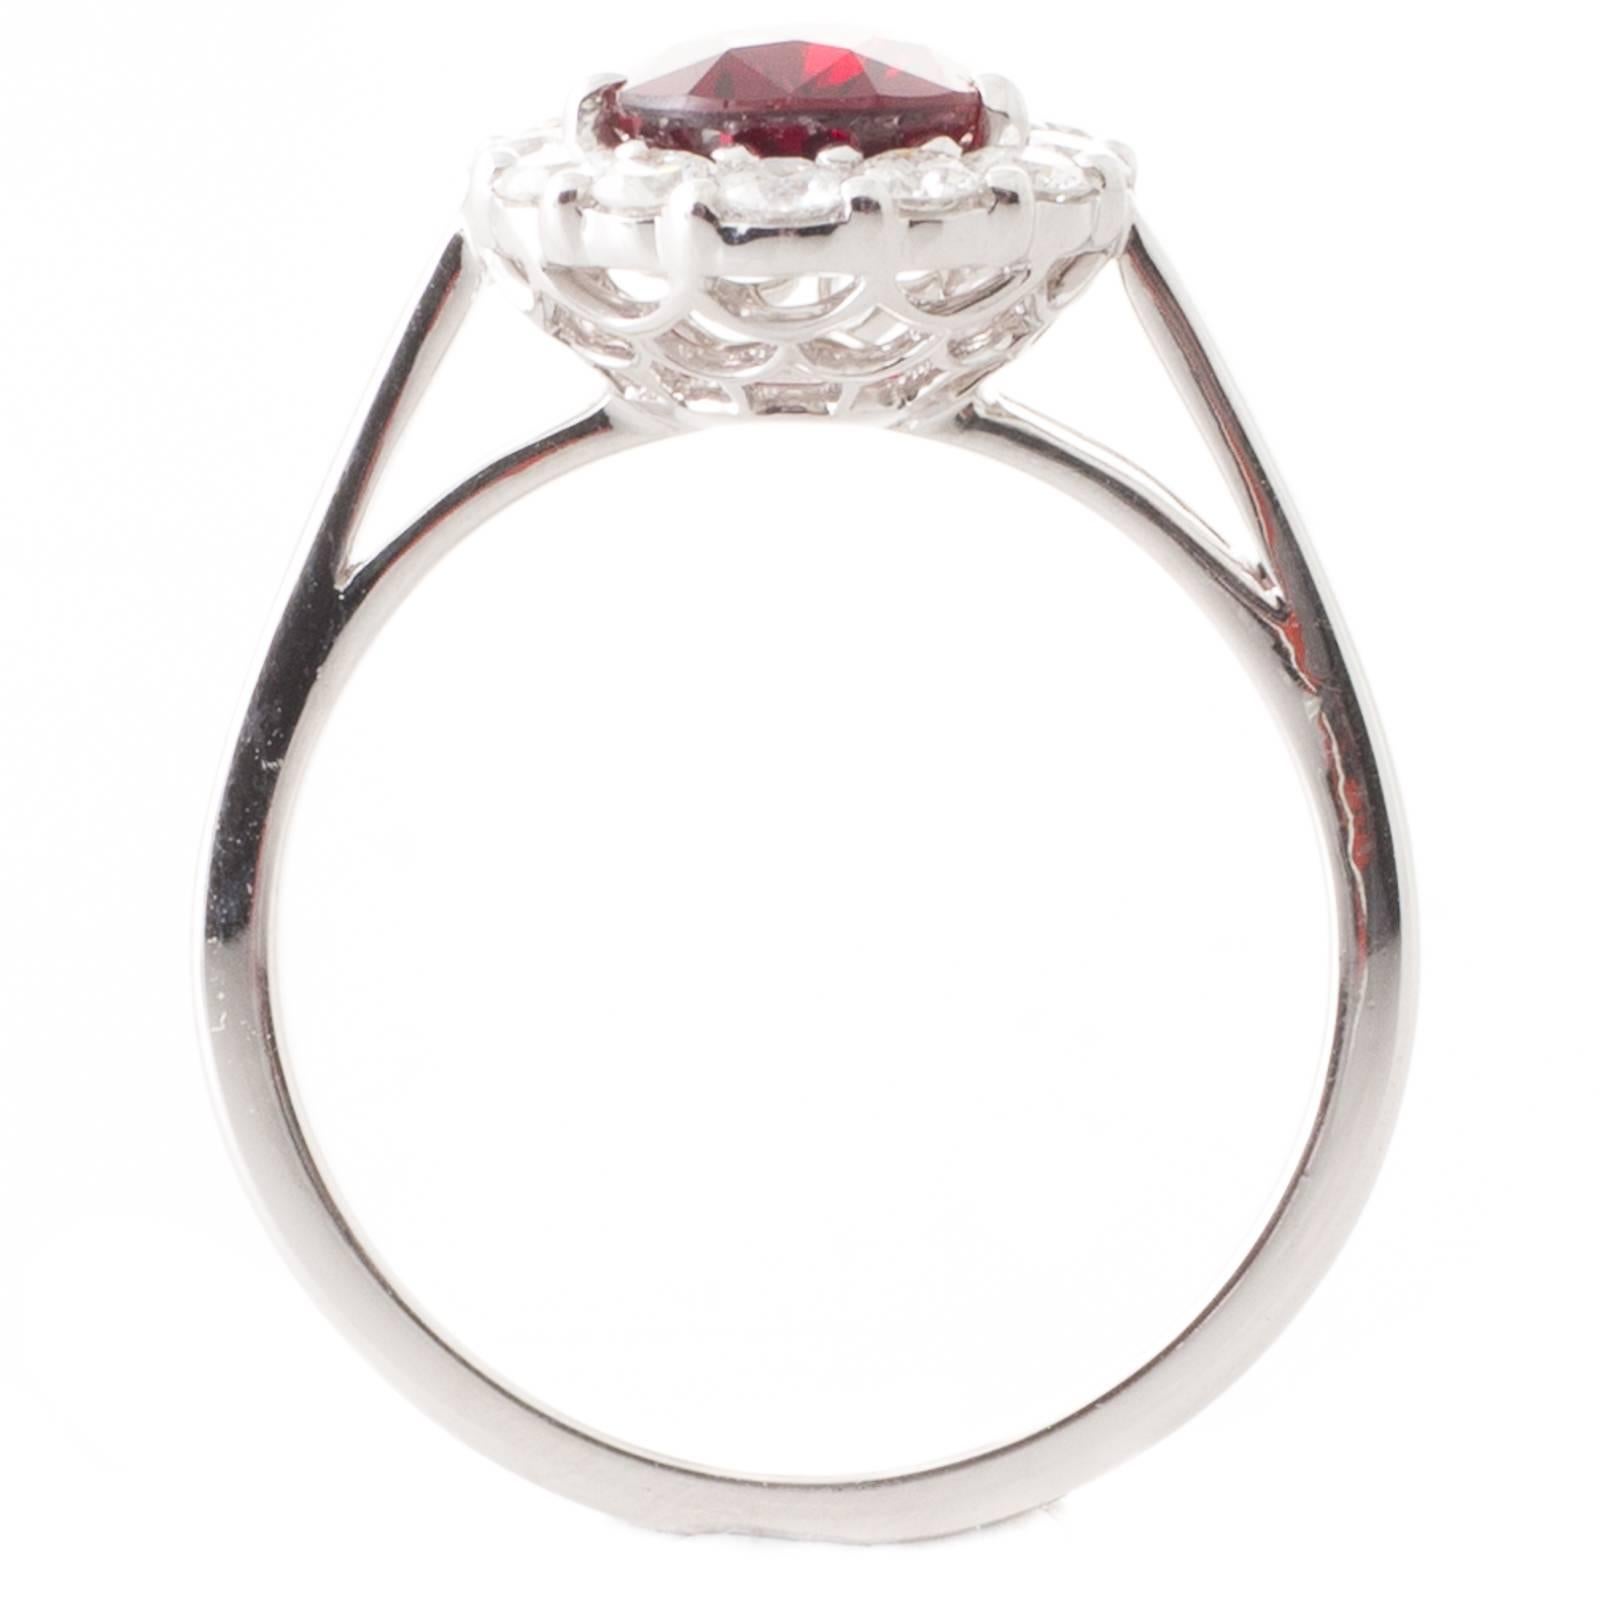 18ct white gold ring claw set to the centre with a 1.57ct GRS certified Mozambique ruby with a surround of fourteen claw set round brilliant cut diamonds all above a filigree style undergallery to upswept shoulders and a plain polished band. Total